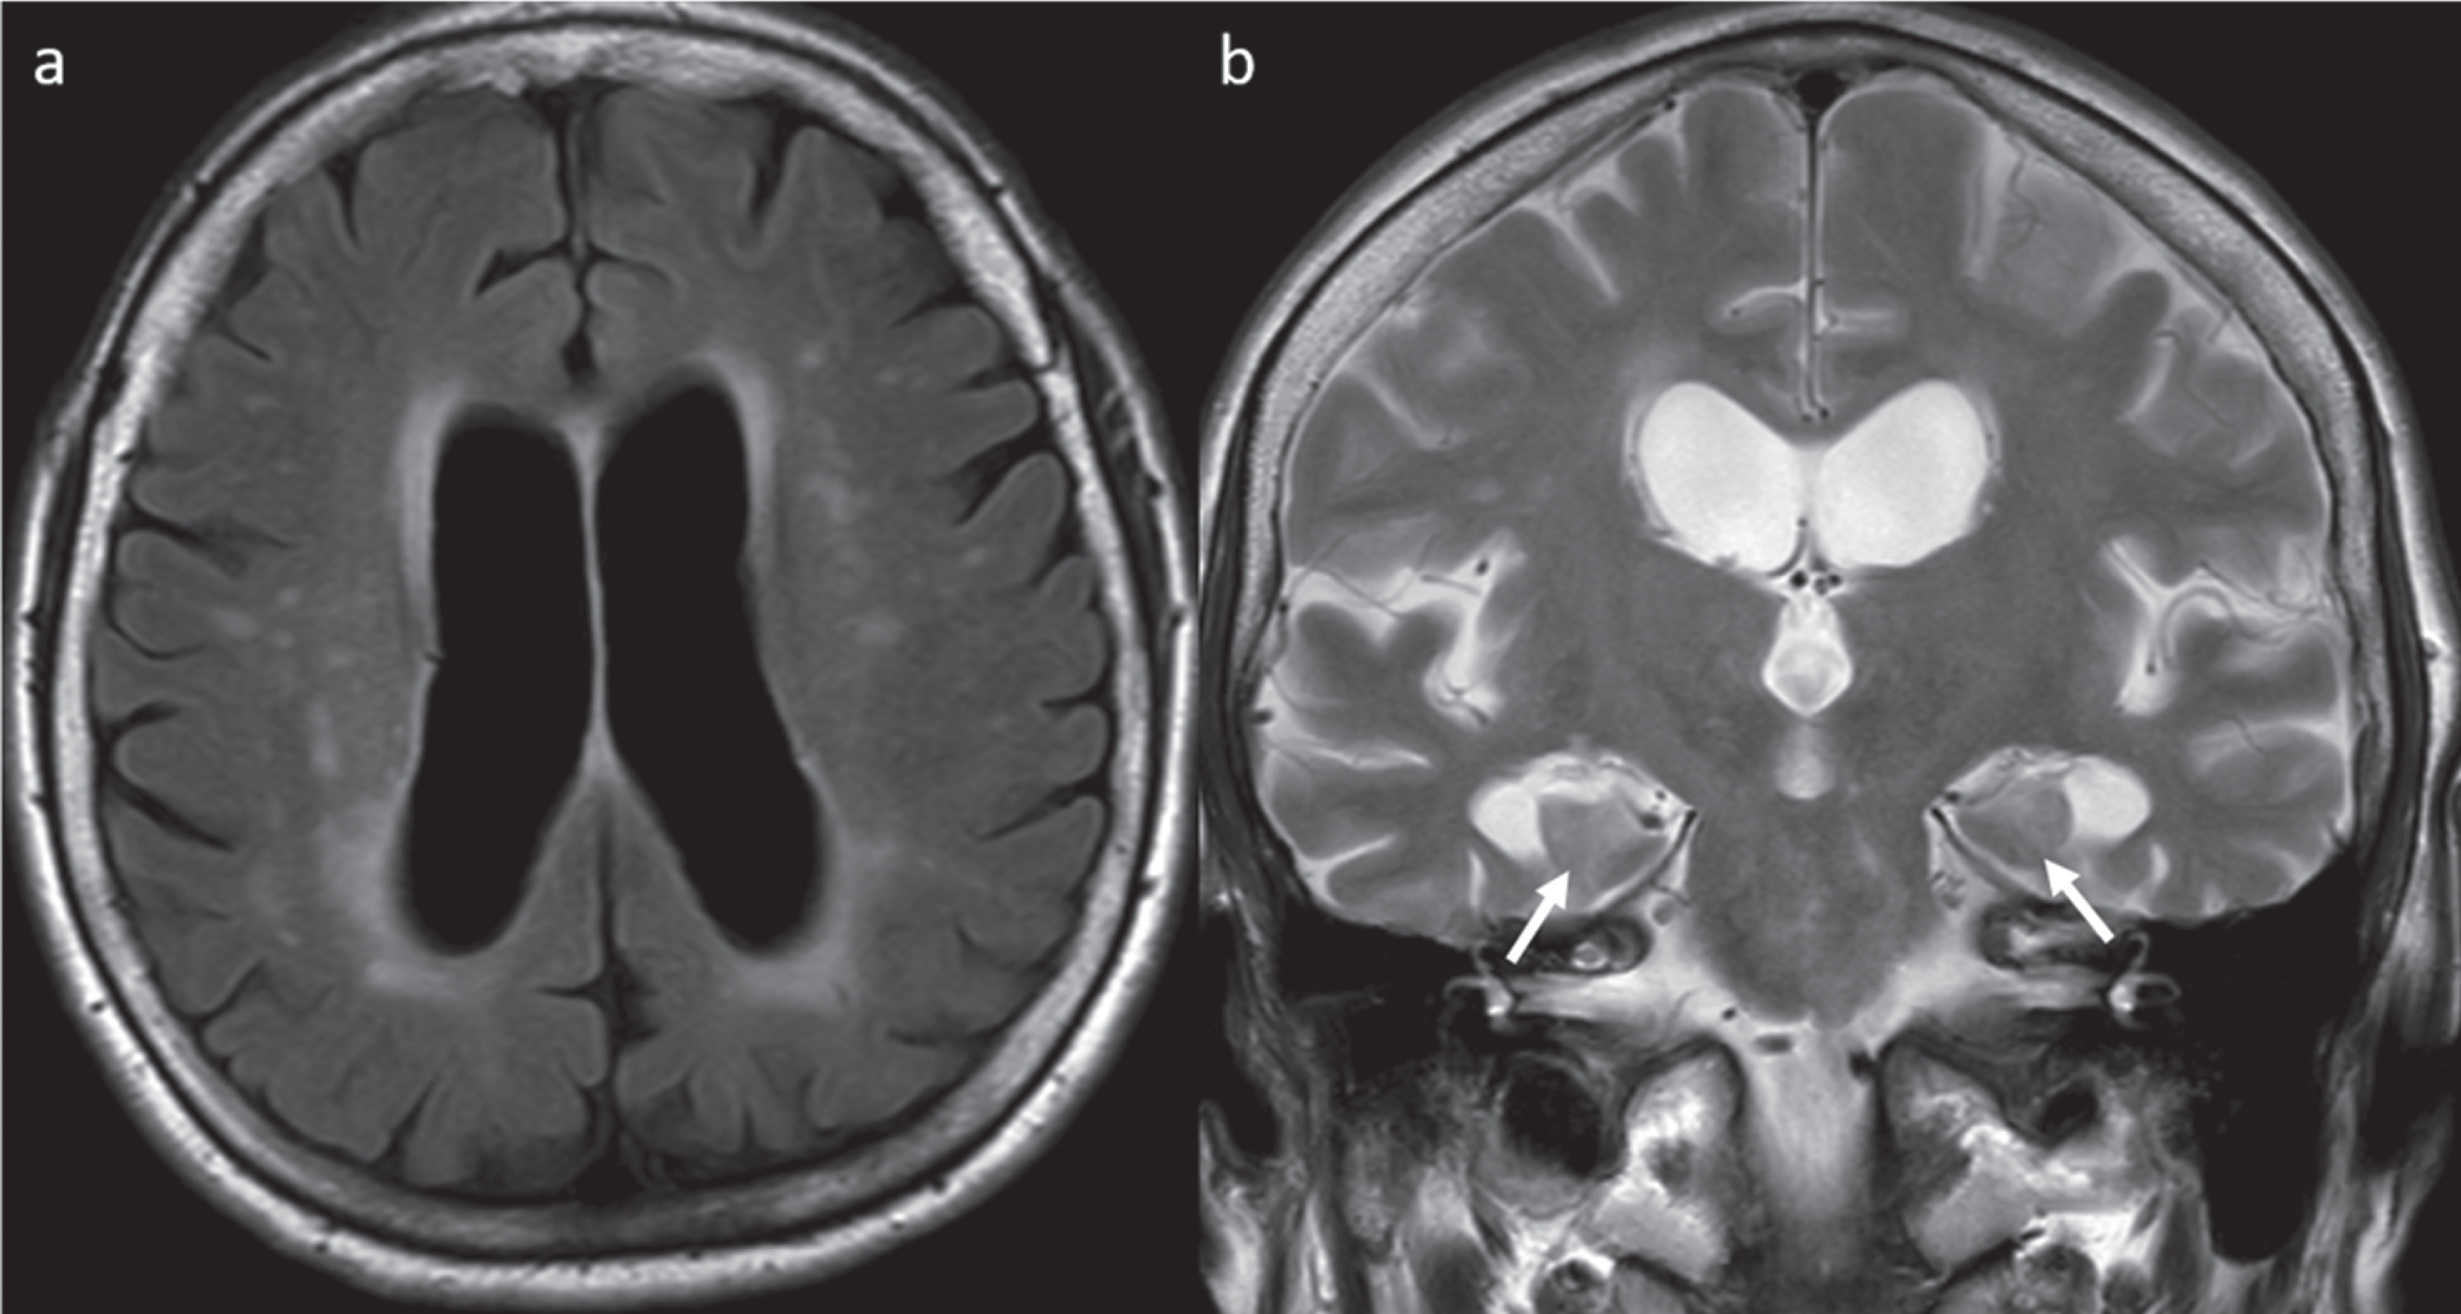 MRI of the brain demonstrating mild-moderately enlarged lateral ventricles. a) Axial T2-weighted FLAIR demonstrating periventricular foci of prolonged T2 signal as well as scattered foci of T2 signal abnormalities compatible with small vessel ischemic disease. b) Coronal T2-weighted image demonstrating atrophy of the mesial temporal structures (arrows indicate diminished size of the hippocampi).